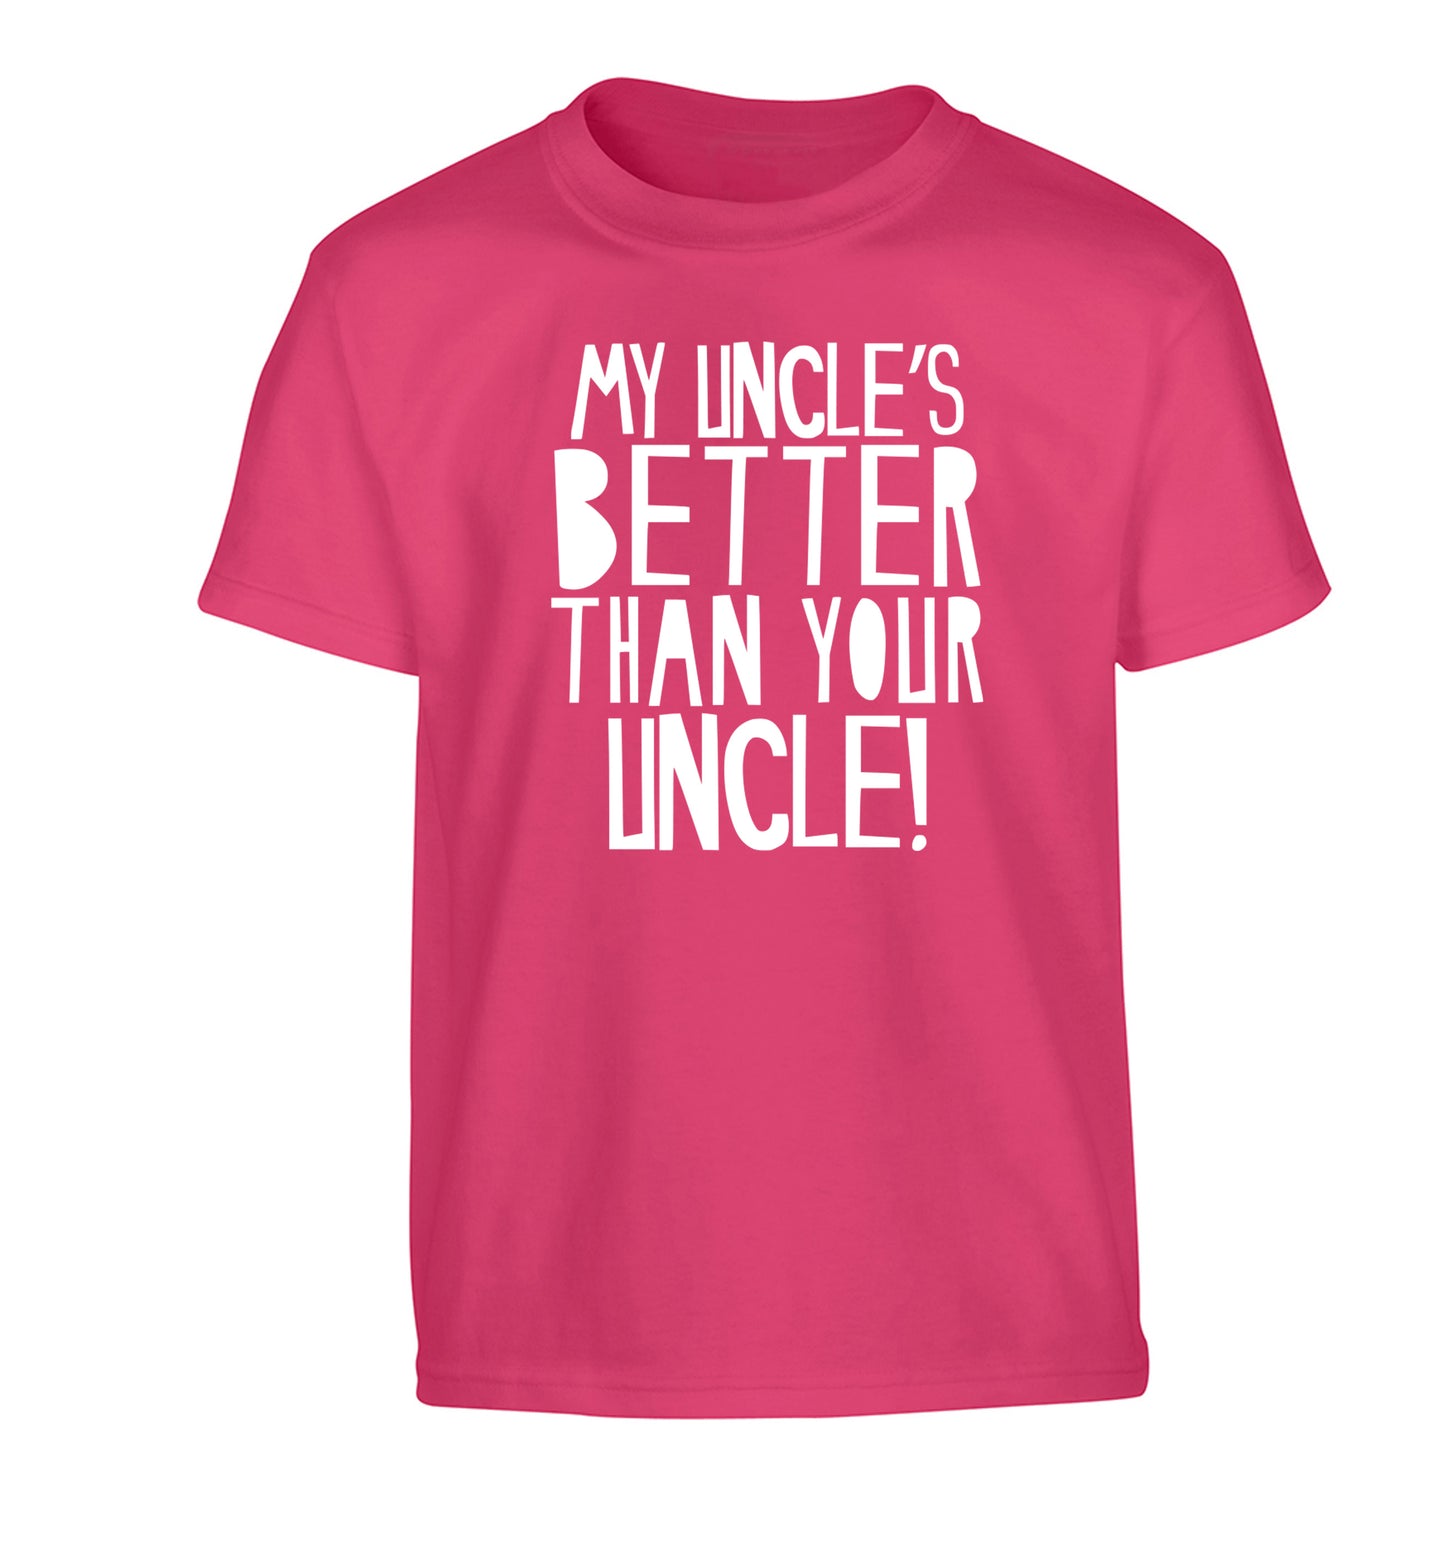 My uncles better than your uncle Children's pink Tshirt 12-13 Years